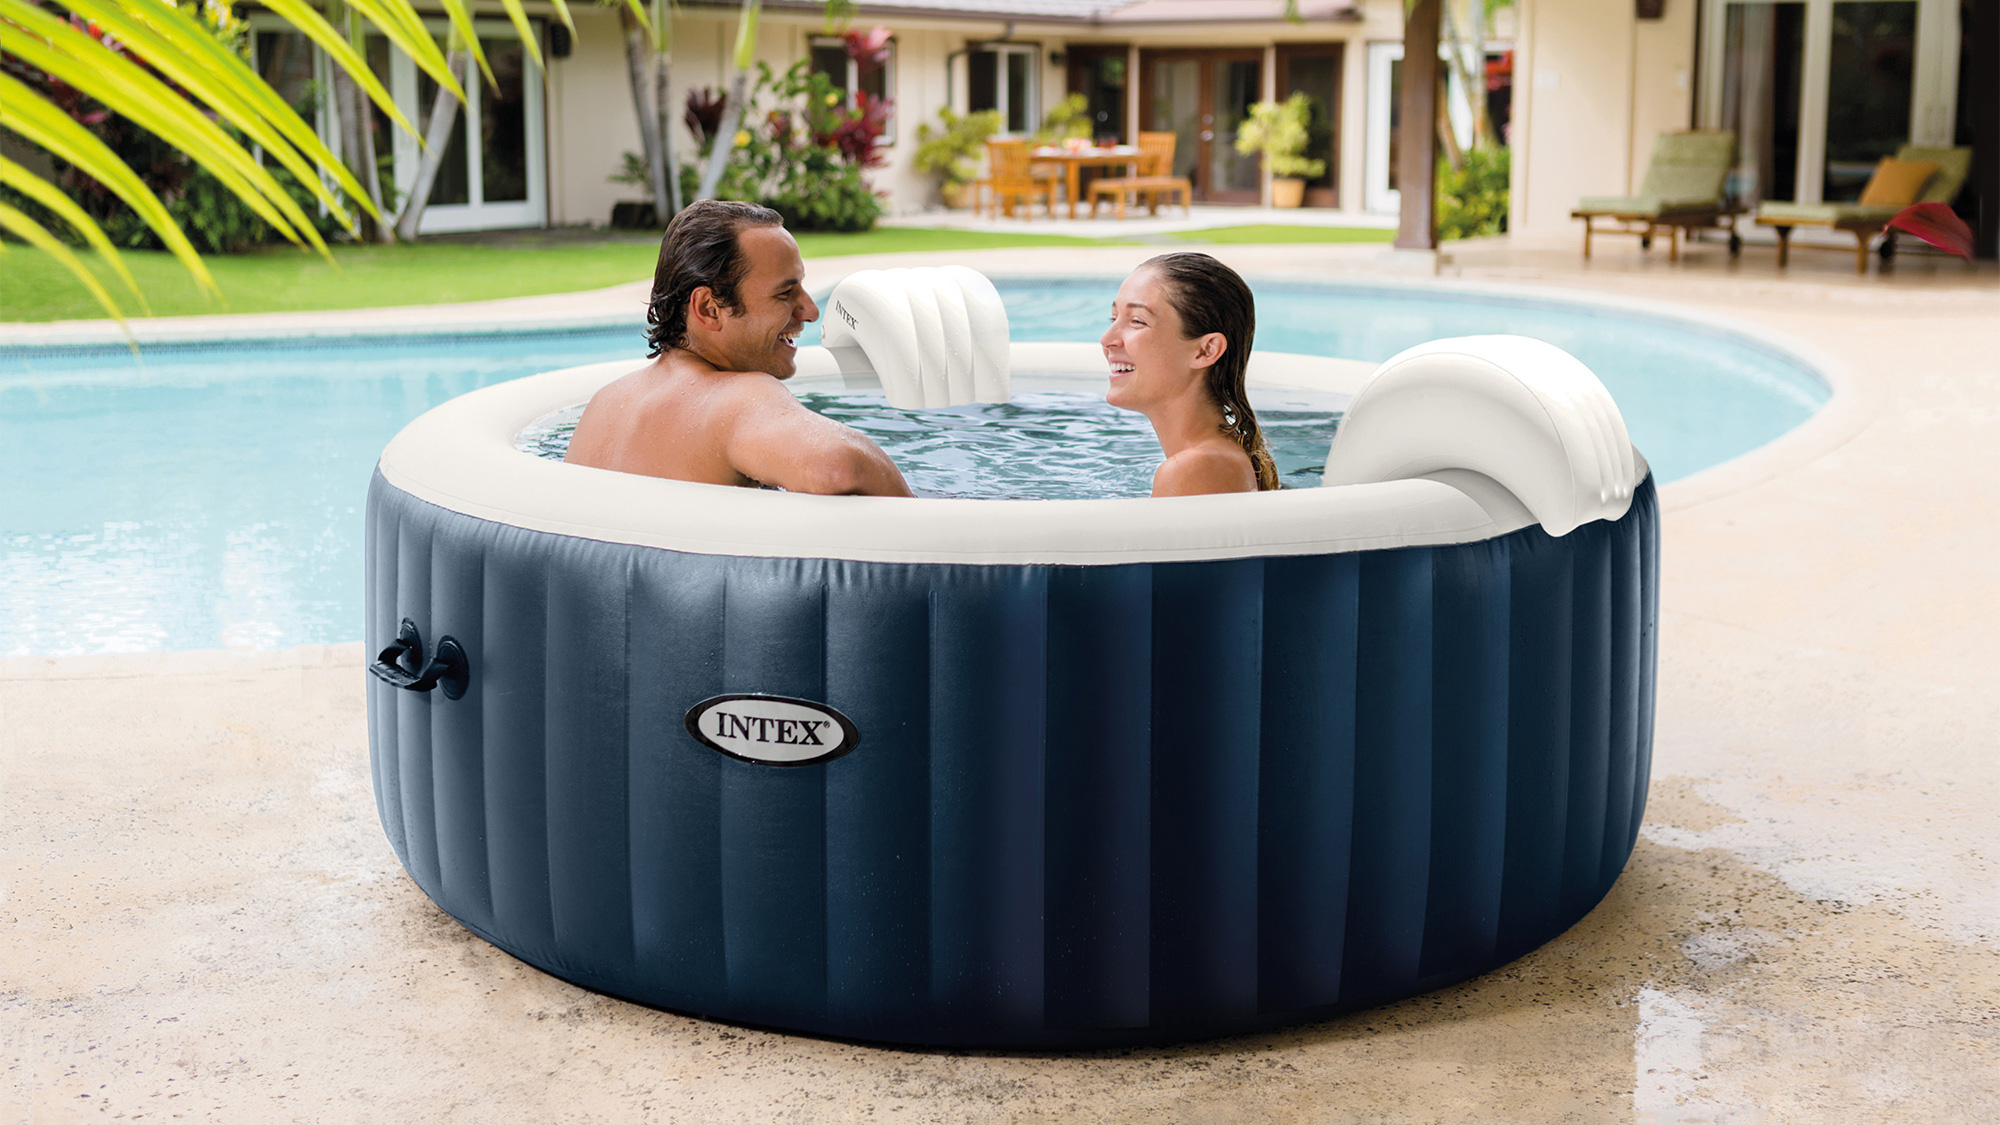 AquaSpa Portable Hot Tub 61X61X26 Inch Air Jet Spa 2-3 Person Inflatable Square Outdoor Heated Hot Tub Spa with 120 Bubble Jets 